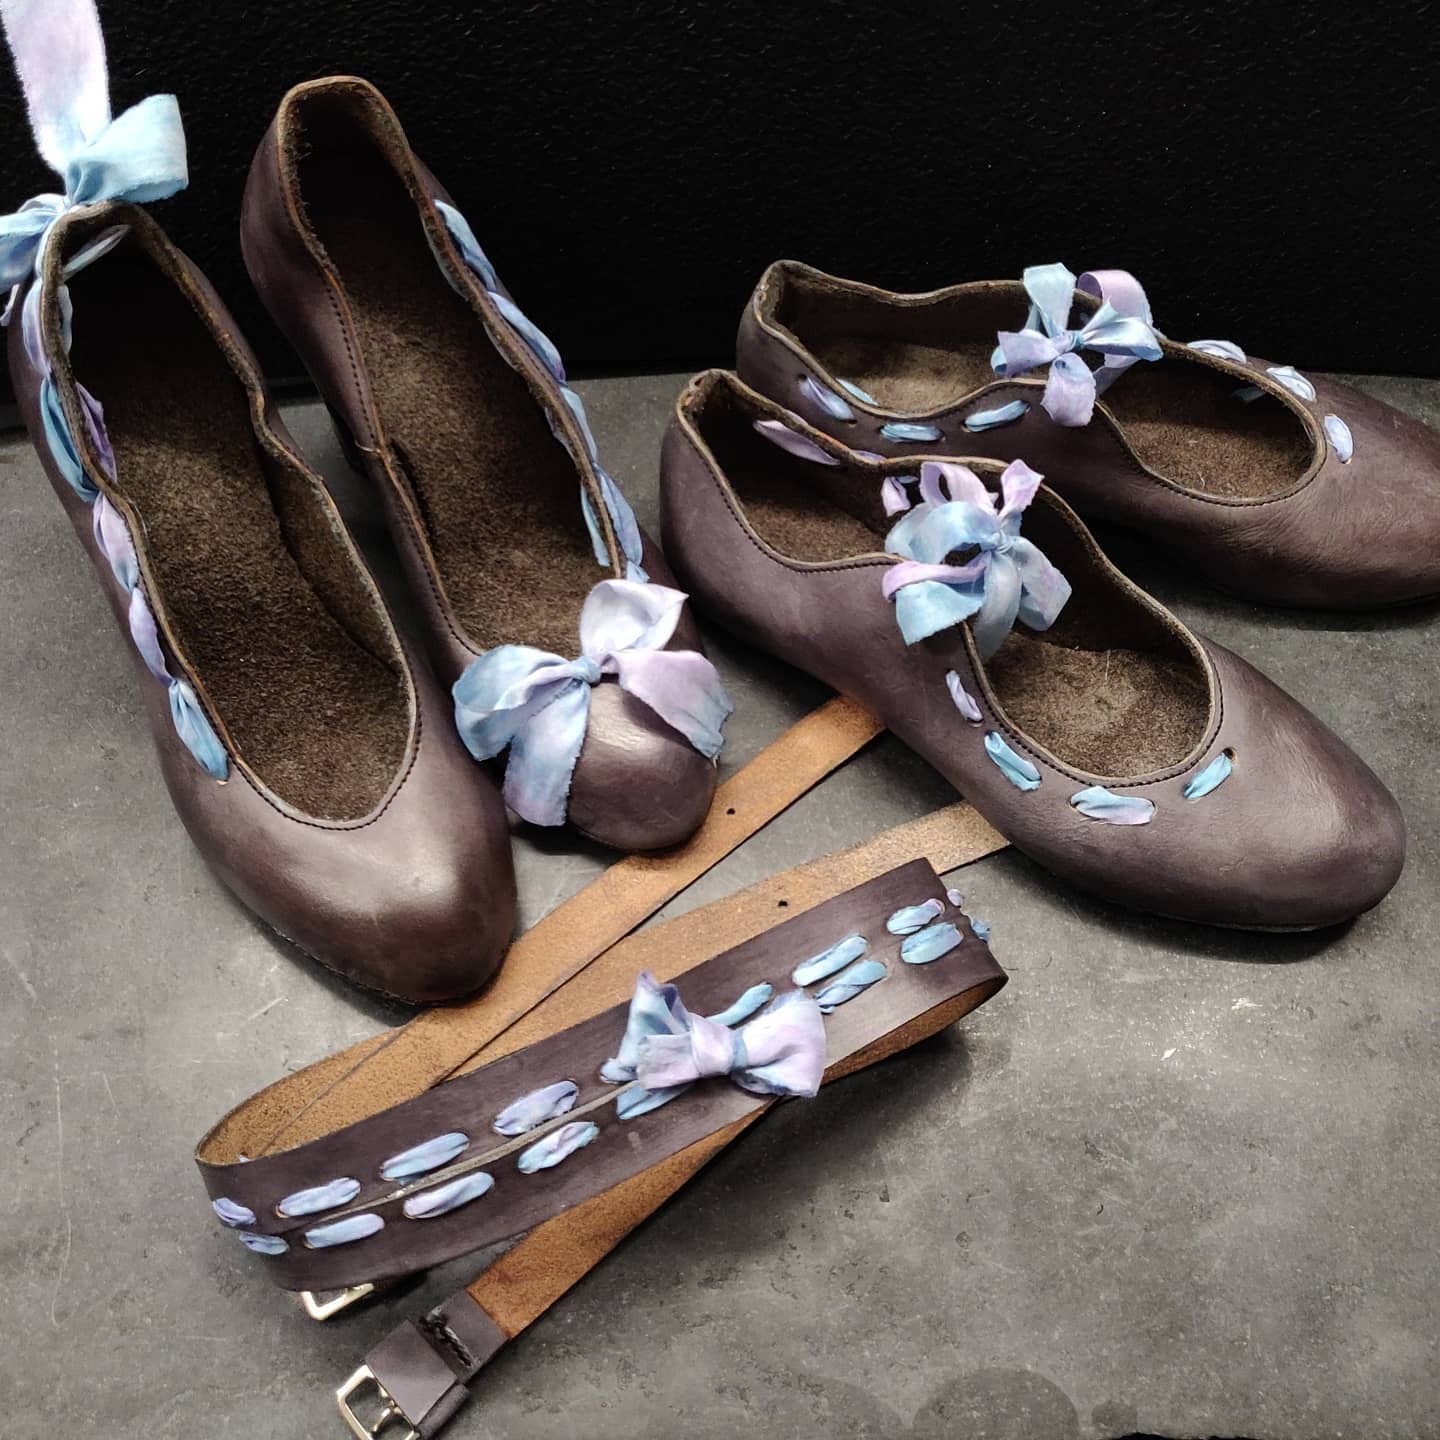 The full collection of all ribboned up including pumps, flat and a ribbon. All in grey leather with ribbons in a soft purple blue. 